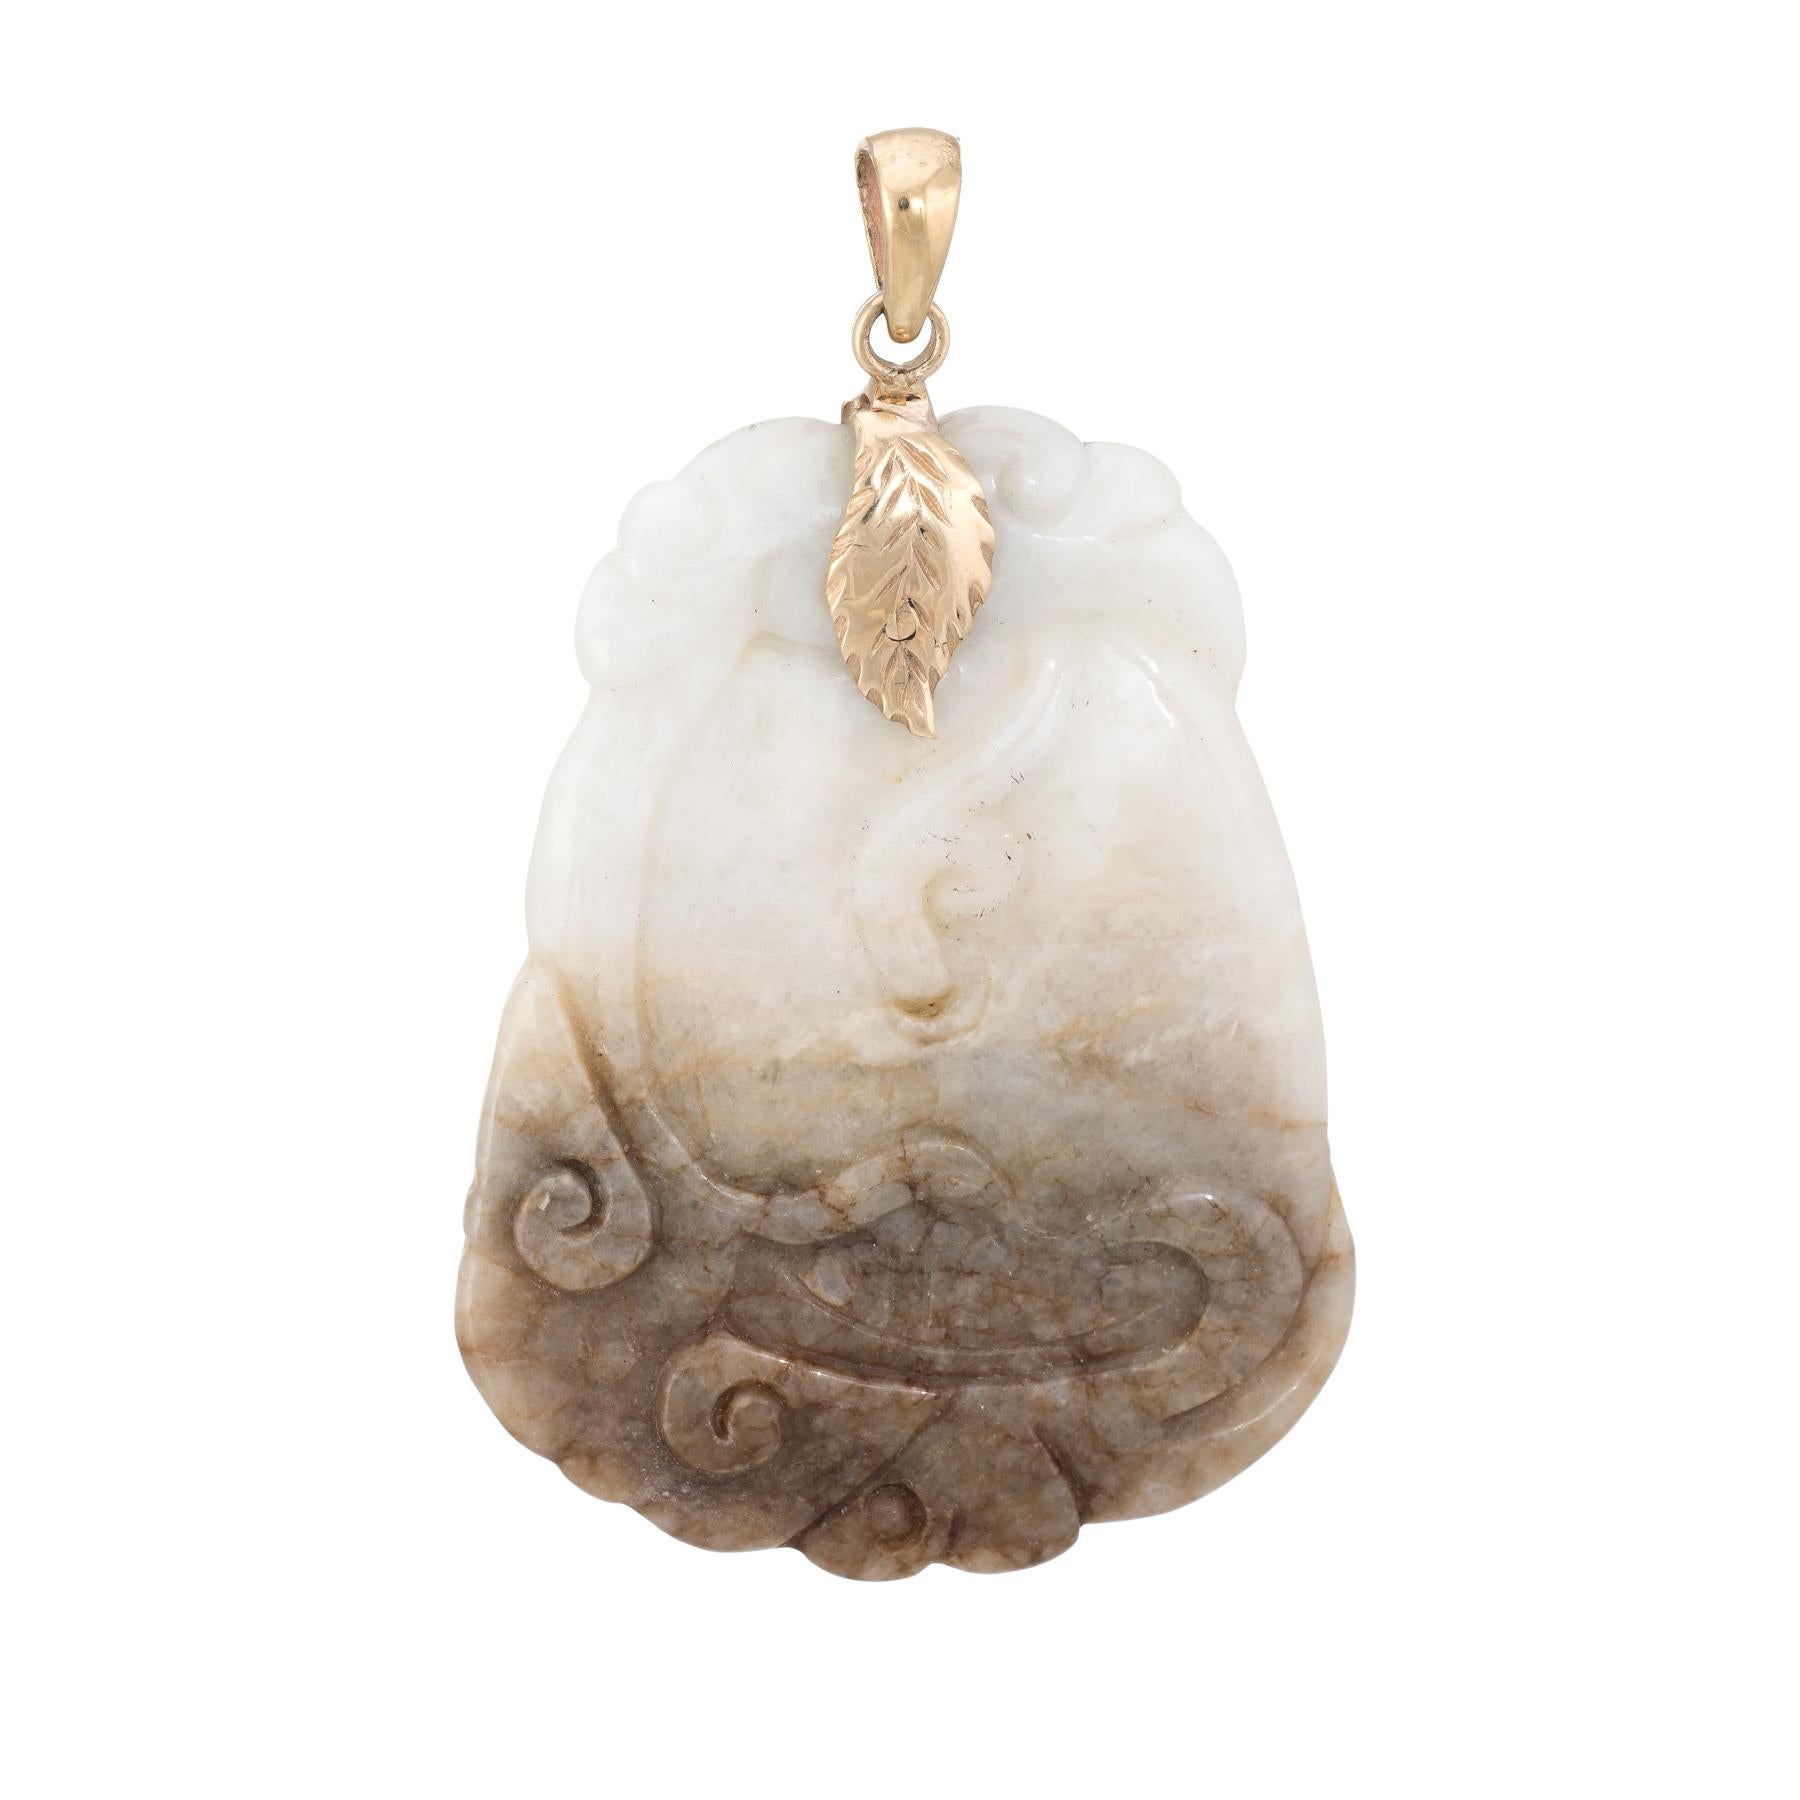 Finely detailed vintage jade pendant (circa 1960s to 1970s), finished with a 14 karat yellow gold bale. 

The jade measures 2 x 1 1/2 inches and is carved in a botanical motif. The jade graduates from white to a warm shade of brown at the base.